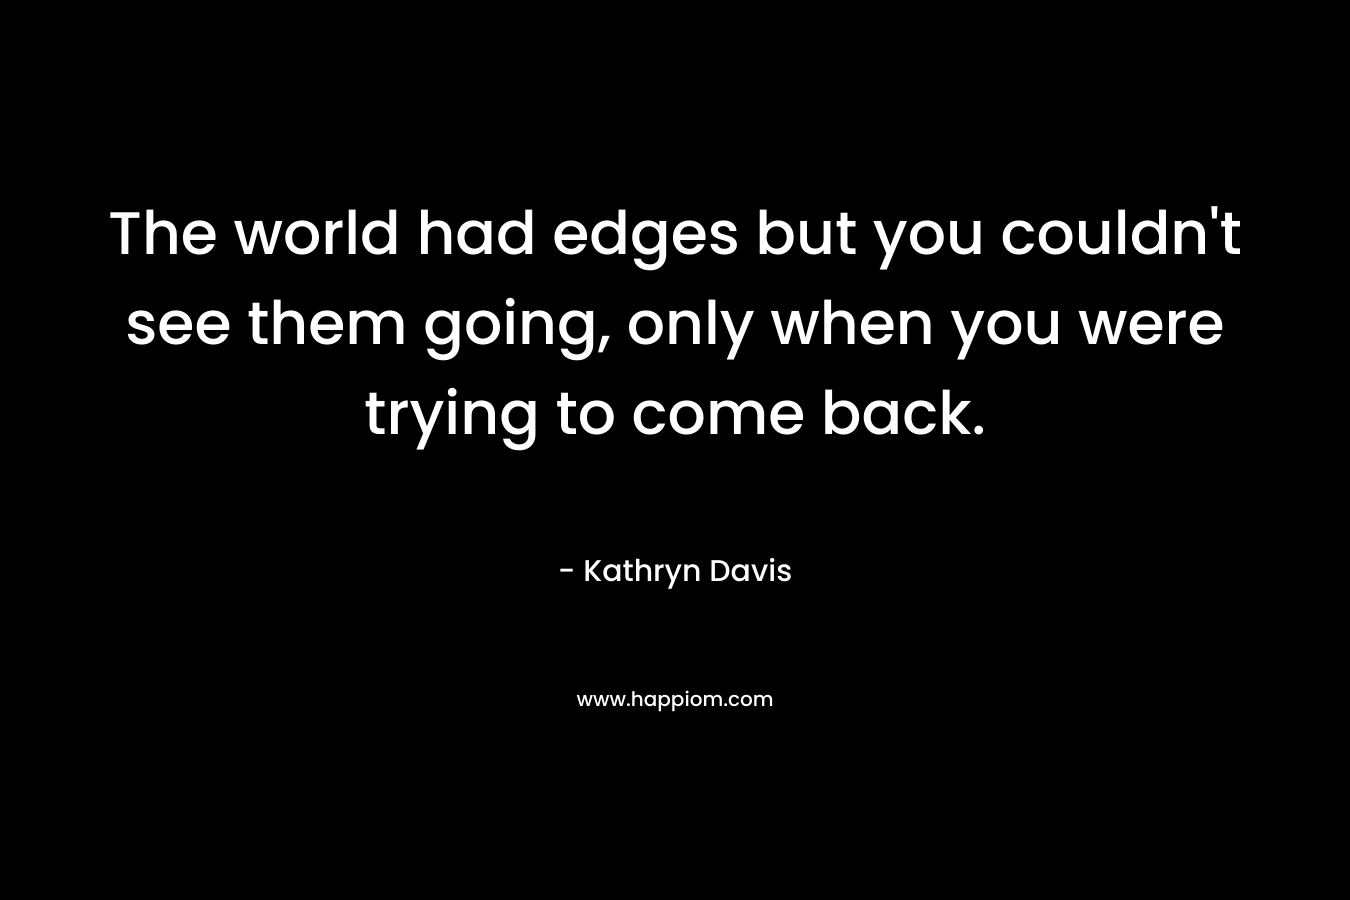 The world had edges but you couldn’t see them going, only when you were trying to come back. – Kathryn Davis